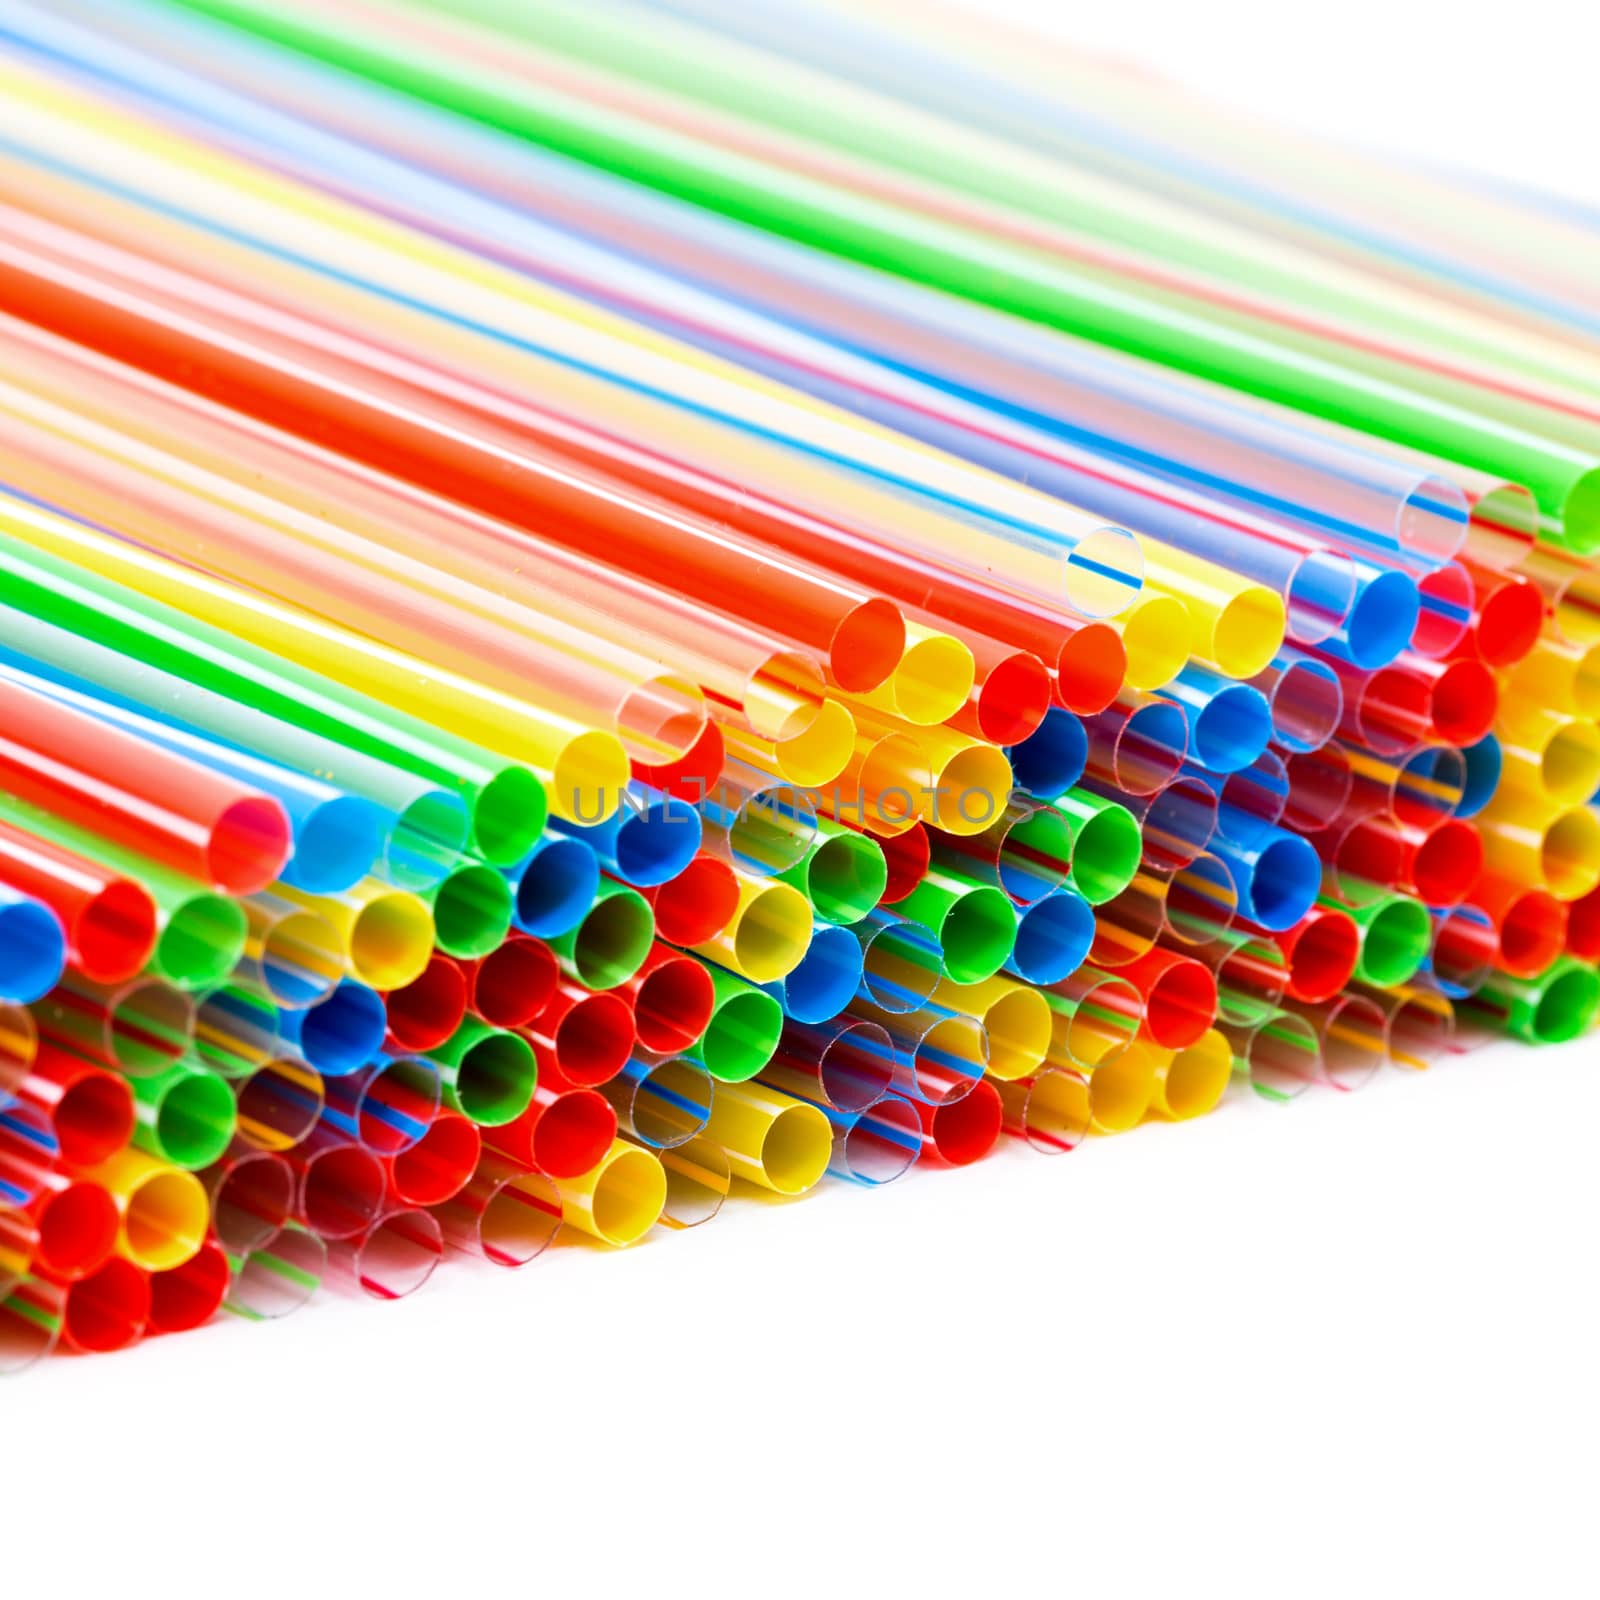 Colored Plastic Drinking Straws by Discovod